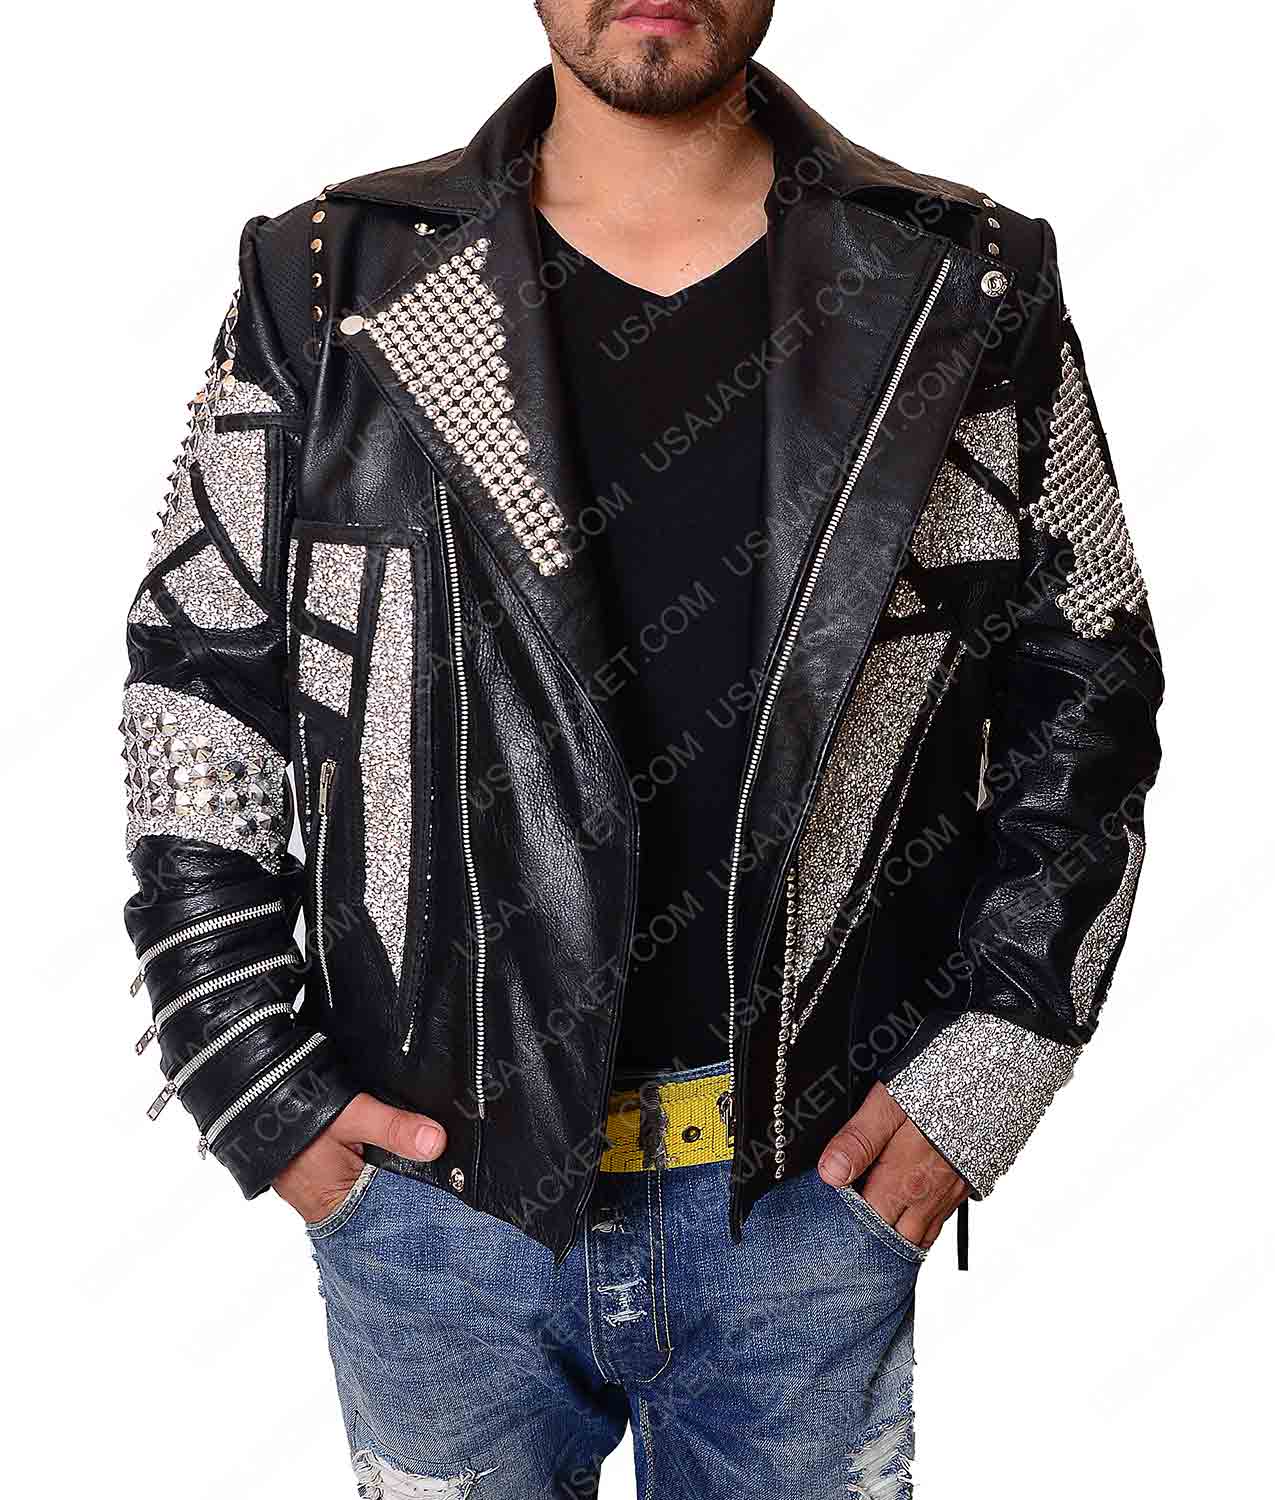 motorcycle leather jacket size guide